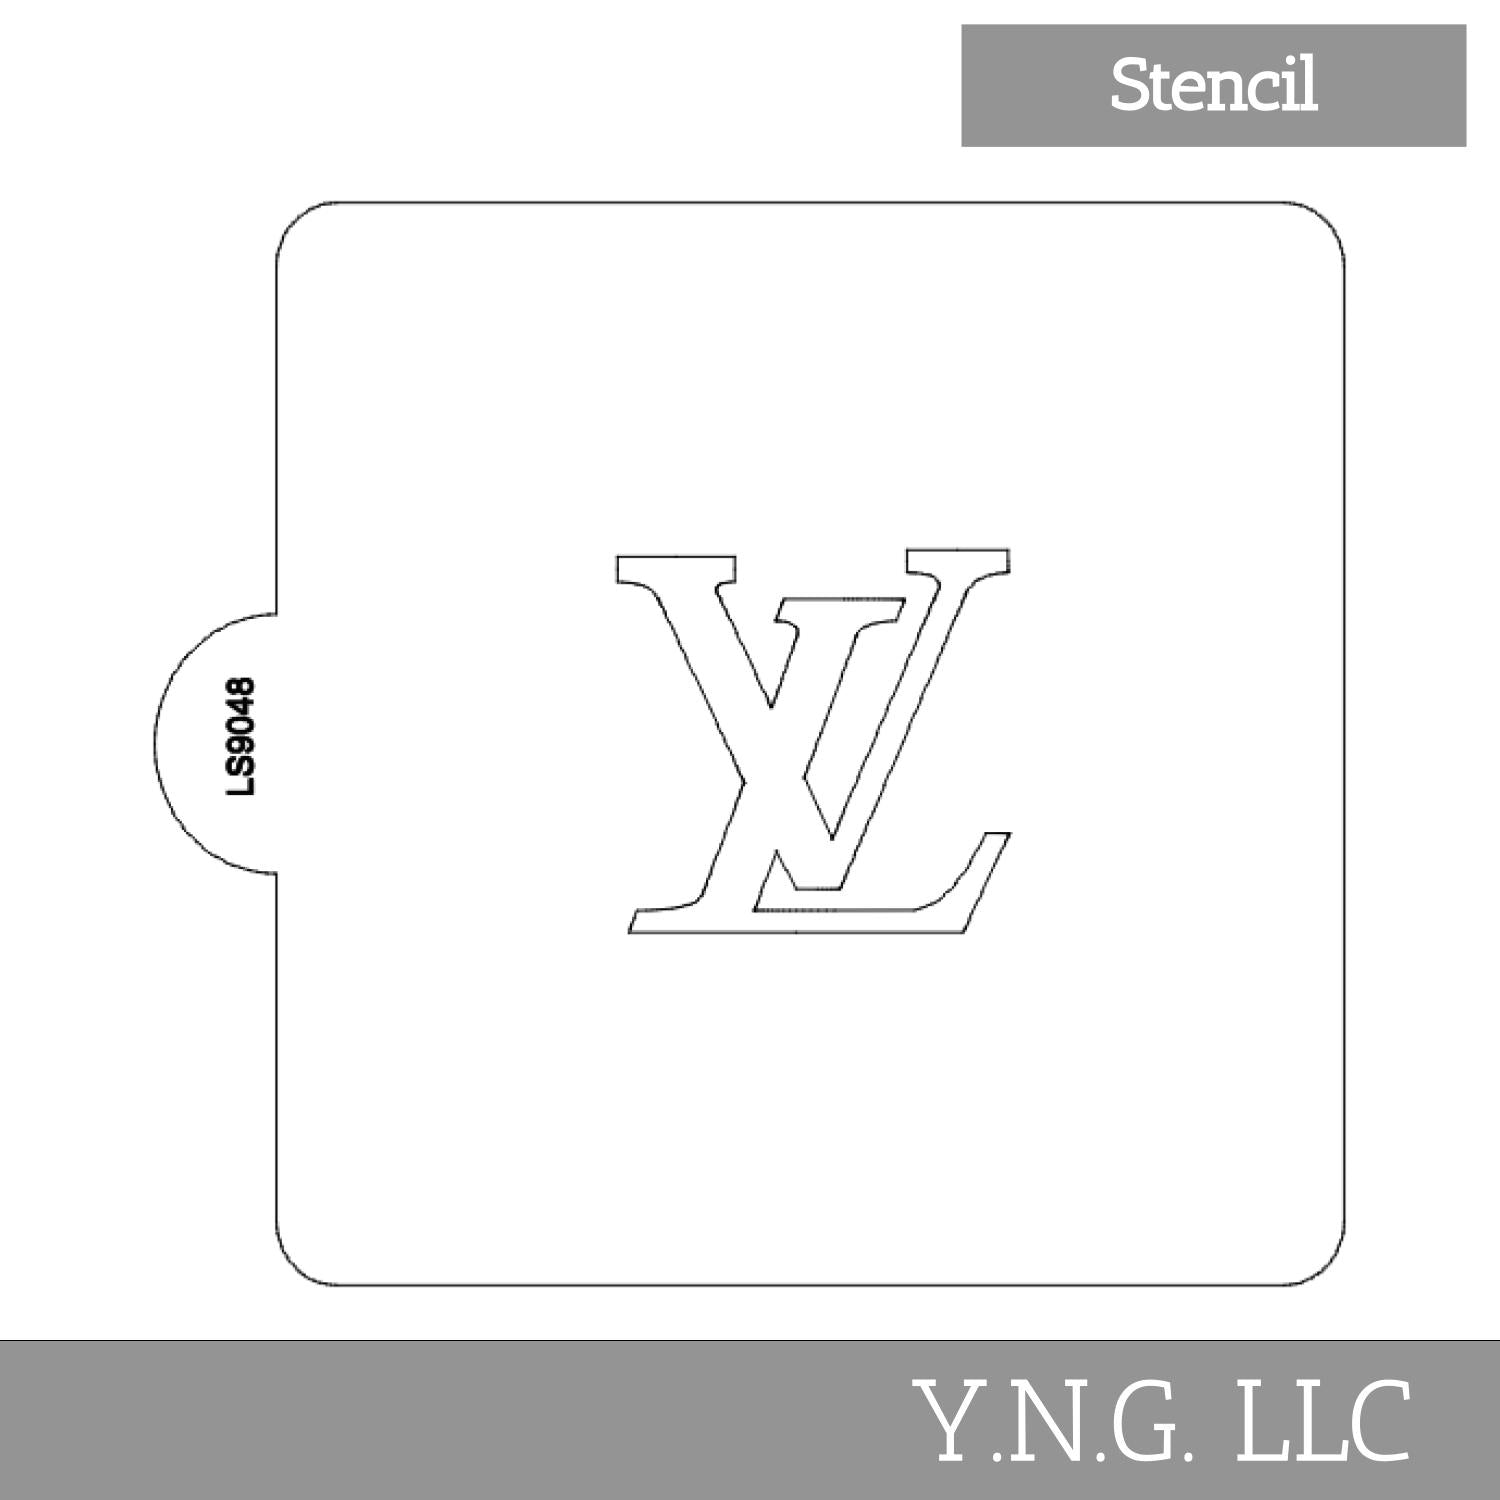 LV Symbol Design Stencil for Cookies or Cakes USA Made LS9048 – Y.N.G. LLC